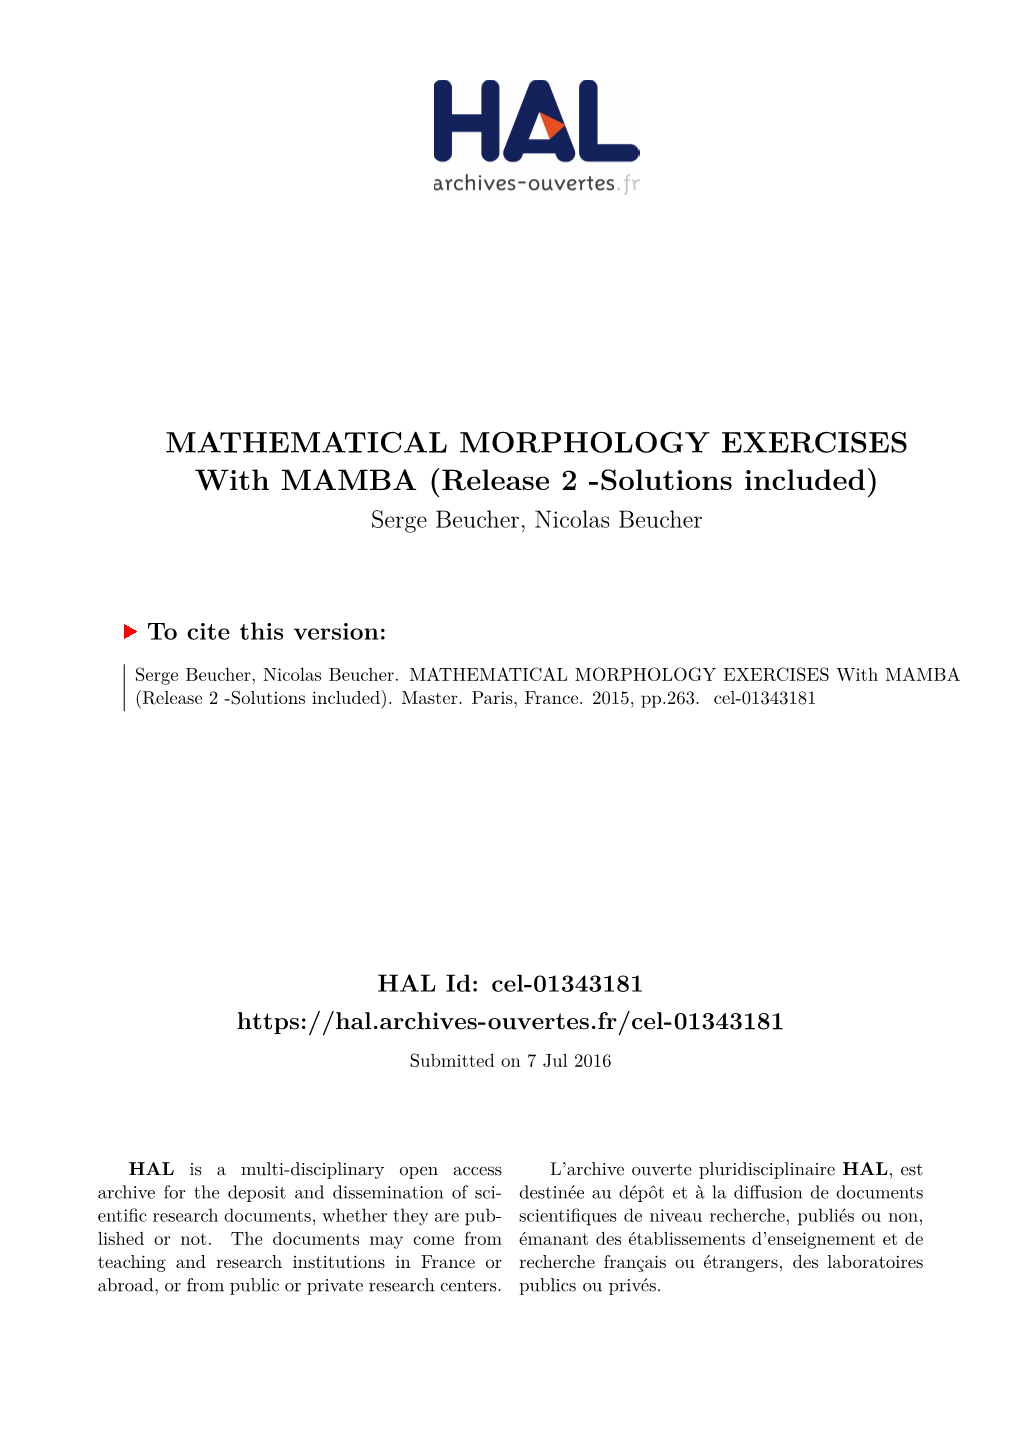 MATHEMATICAL MORPHOLOGY EXERCISES with MAMBA (Release 2 -Solutions Included) Serge Beucher, Nicolas Beucher